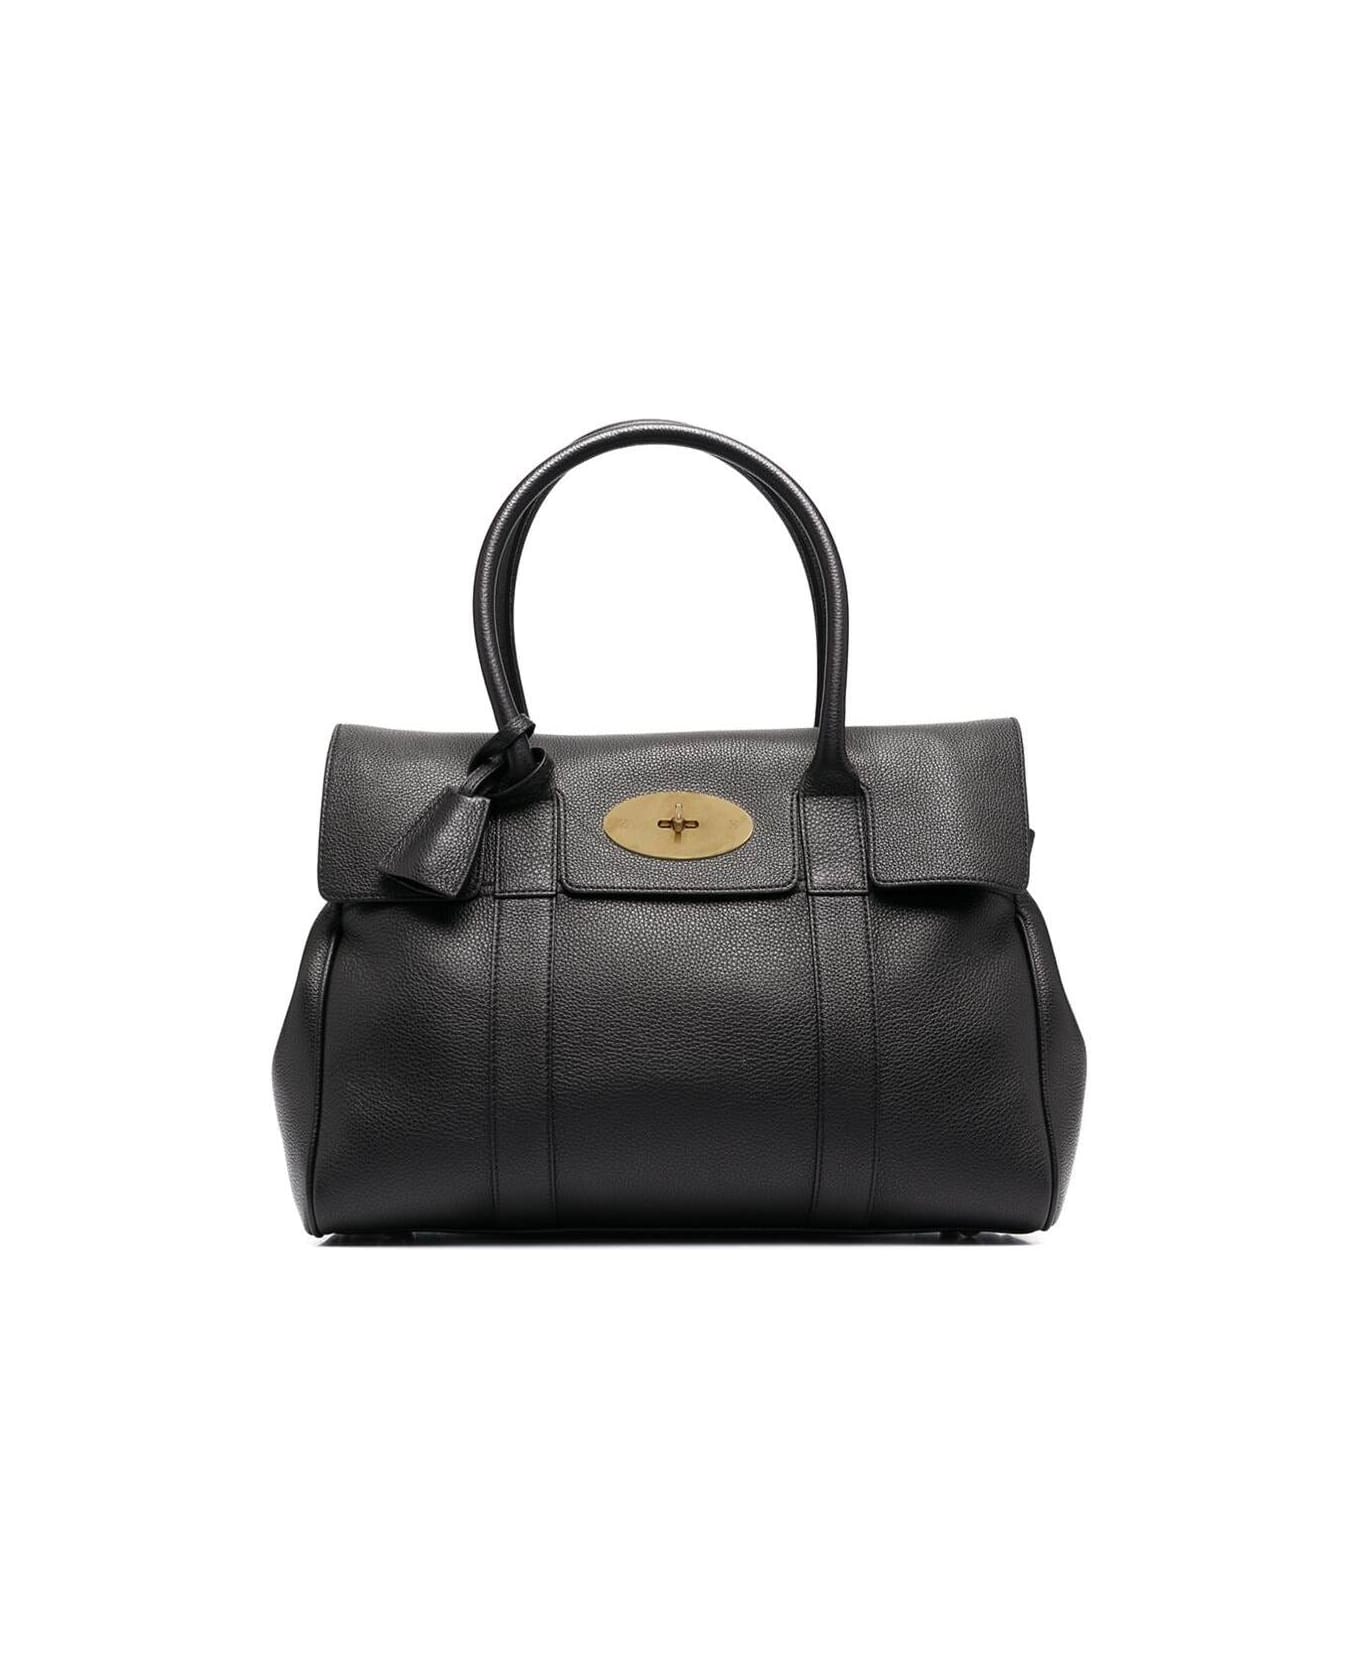 Mulberry 'bayswater' Black Handbag With Twist-lock Fastening In Grainy Leather Woman - Black